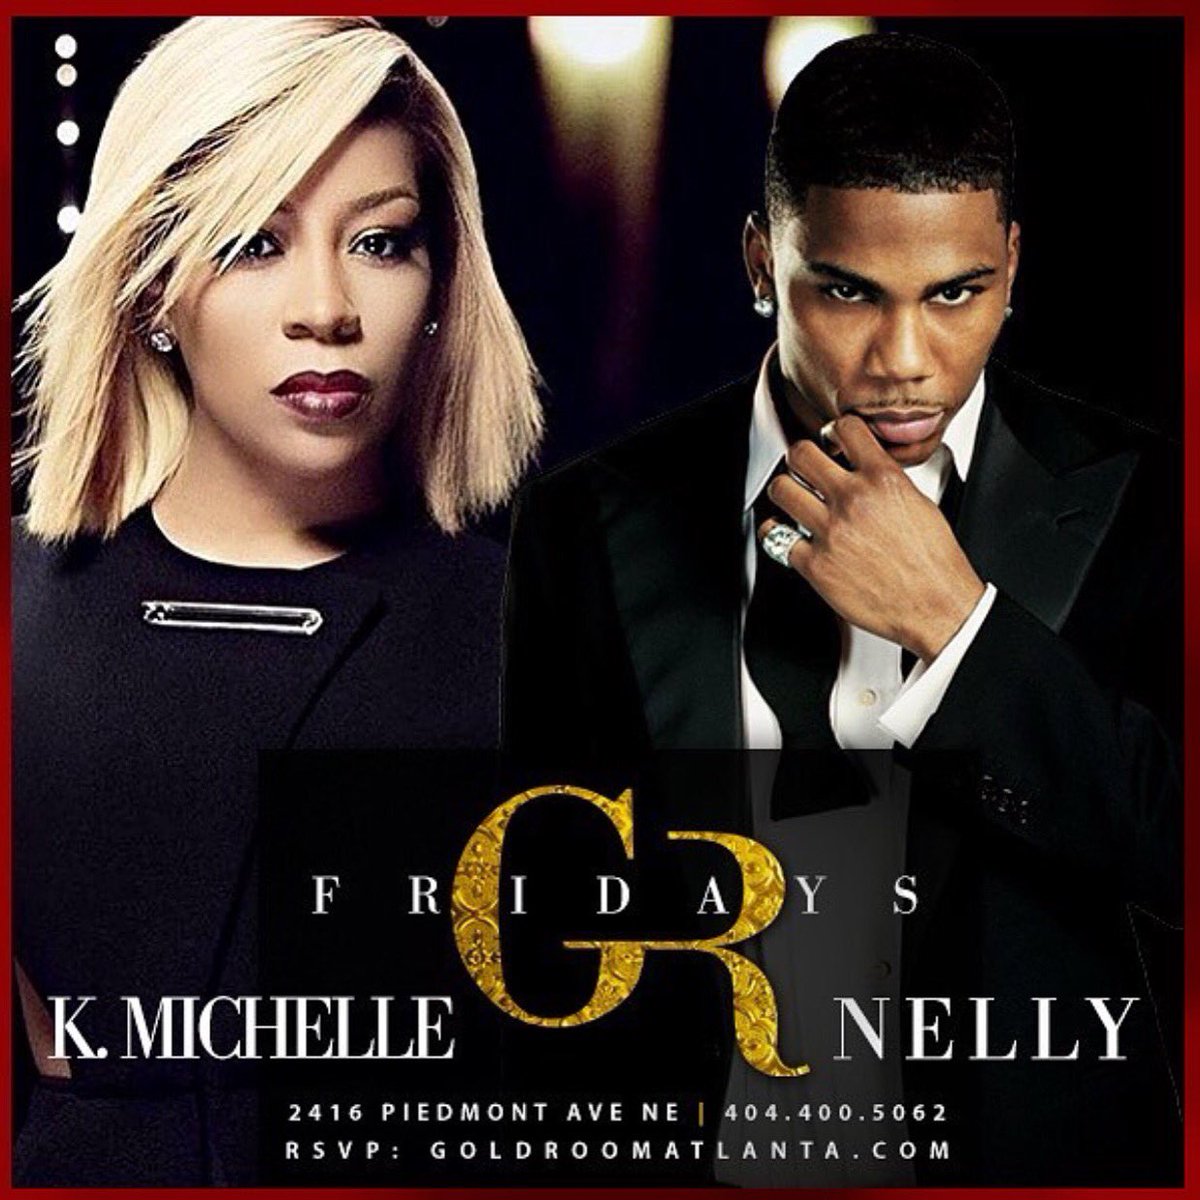 RT @kmichelle: ✨ ATLANTA! ✨

Let's have some fun this Friday! Come hang with me and @Nelly_Mo! ???? #GoldRoomFridays https://t.co/wVqDEsniBo